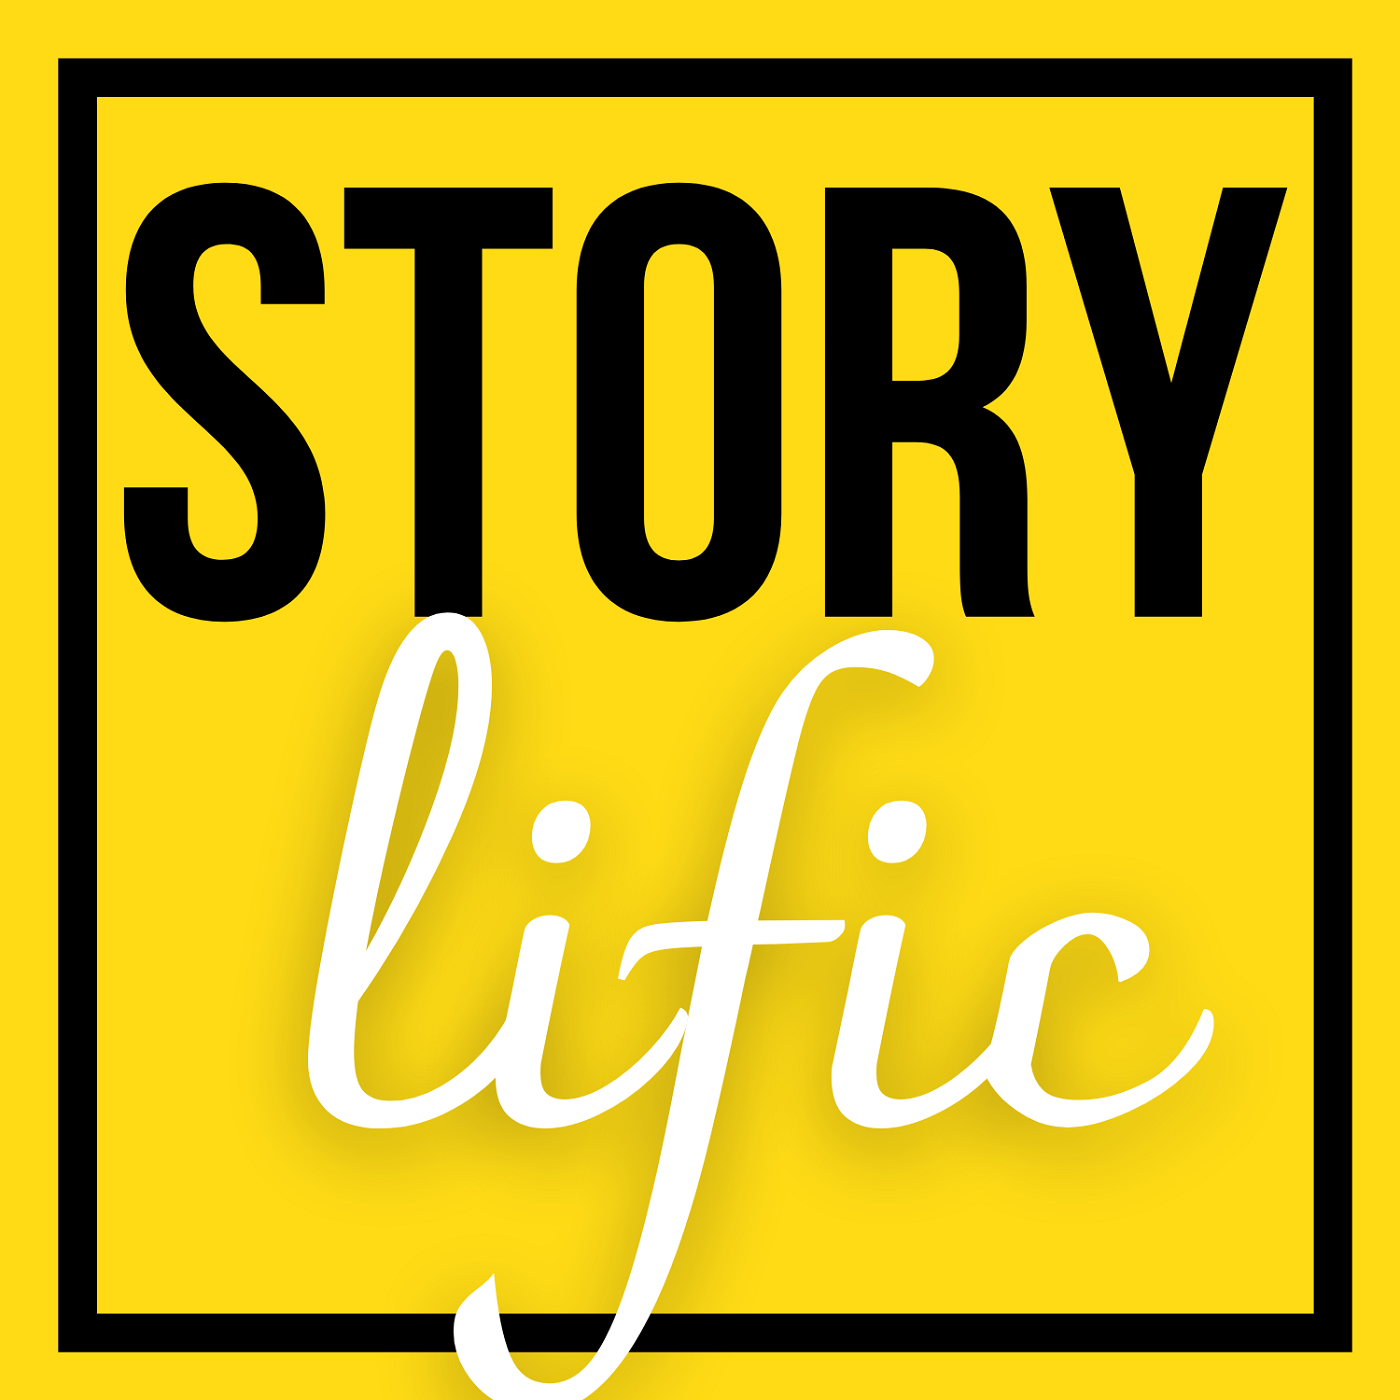 Story lific